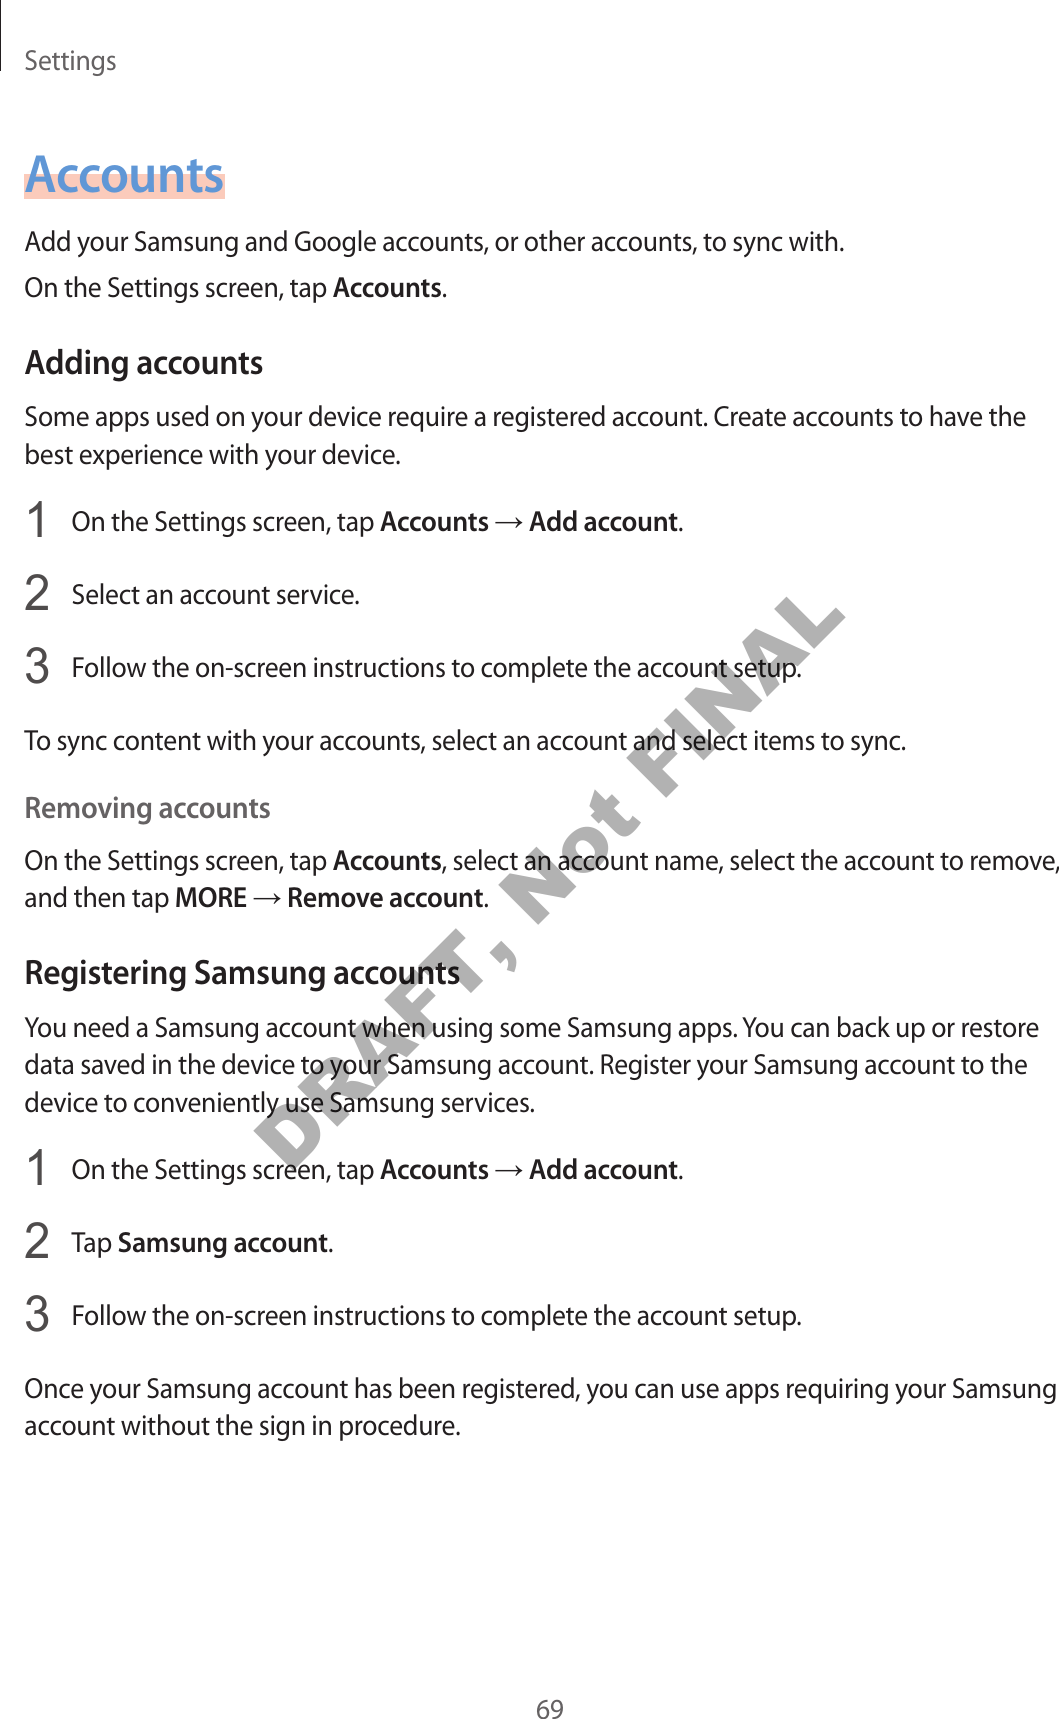 Settings69AccountsAdd your Samsung and Google accounts, or other accounts, to sync with.On the Settings screen, tap Accounts.Adding accountsSome apps used on your device require a registered account. Create accounts to have the best experience with your device.1  On the Settings screen, tap Accounts  Add account.2  Select an account service.3  Follow the on-screen instructions to complete the account setup.To sync content with your accounts, select an account and select items to sync.Removing accountsOn the Settings screen, tap Accounts, select an account name, select the account to remove, and then tap MORE  Remove account.Registering Samsung accountsYou need a Samsung account when using some Samsung apps. You can back up or restore data saved in the device to your Samsung account. Register your Samsung account to the device to conveniently use Samsung services.1  On the Settings screen, tap Accounts  Add account.2  Tap Samsung account.3  Follow the on-screen instructions to complete the account setup.Once your Samsung account has been registered, you can use apps requiring your Samsung account without the sign in procedure.DRAFT, Not FINAL